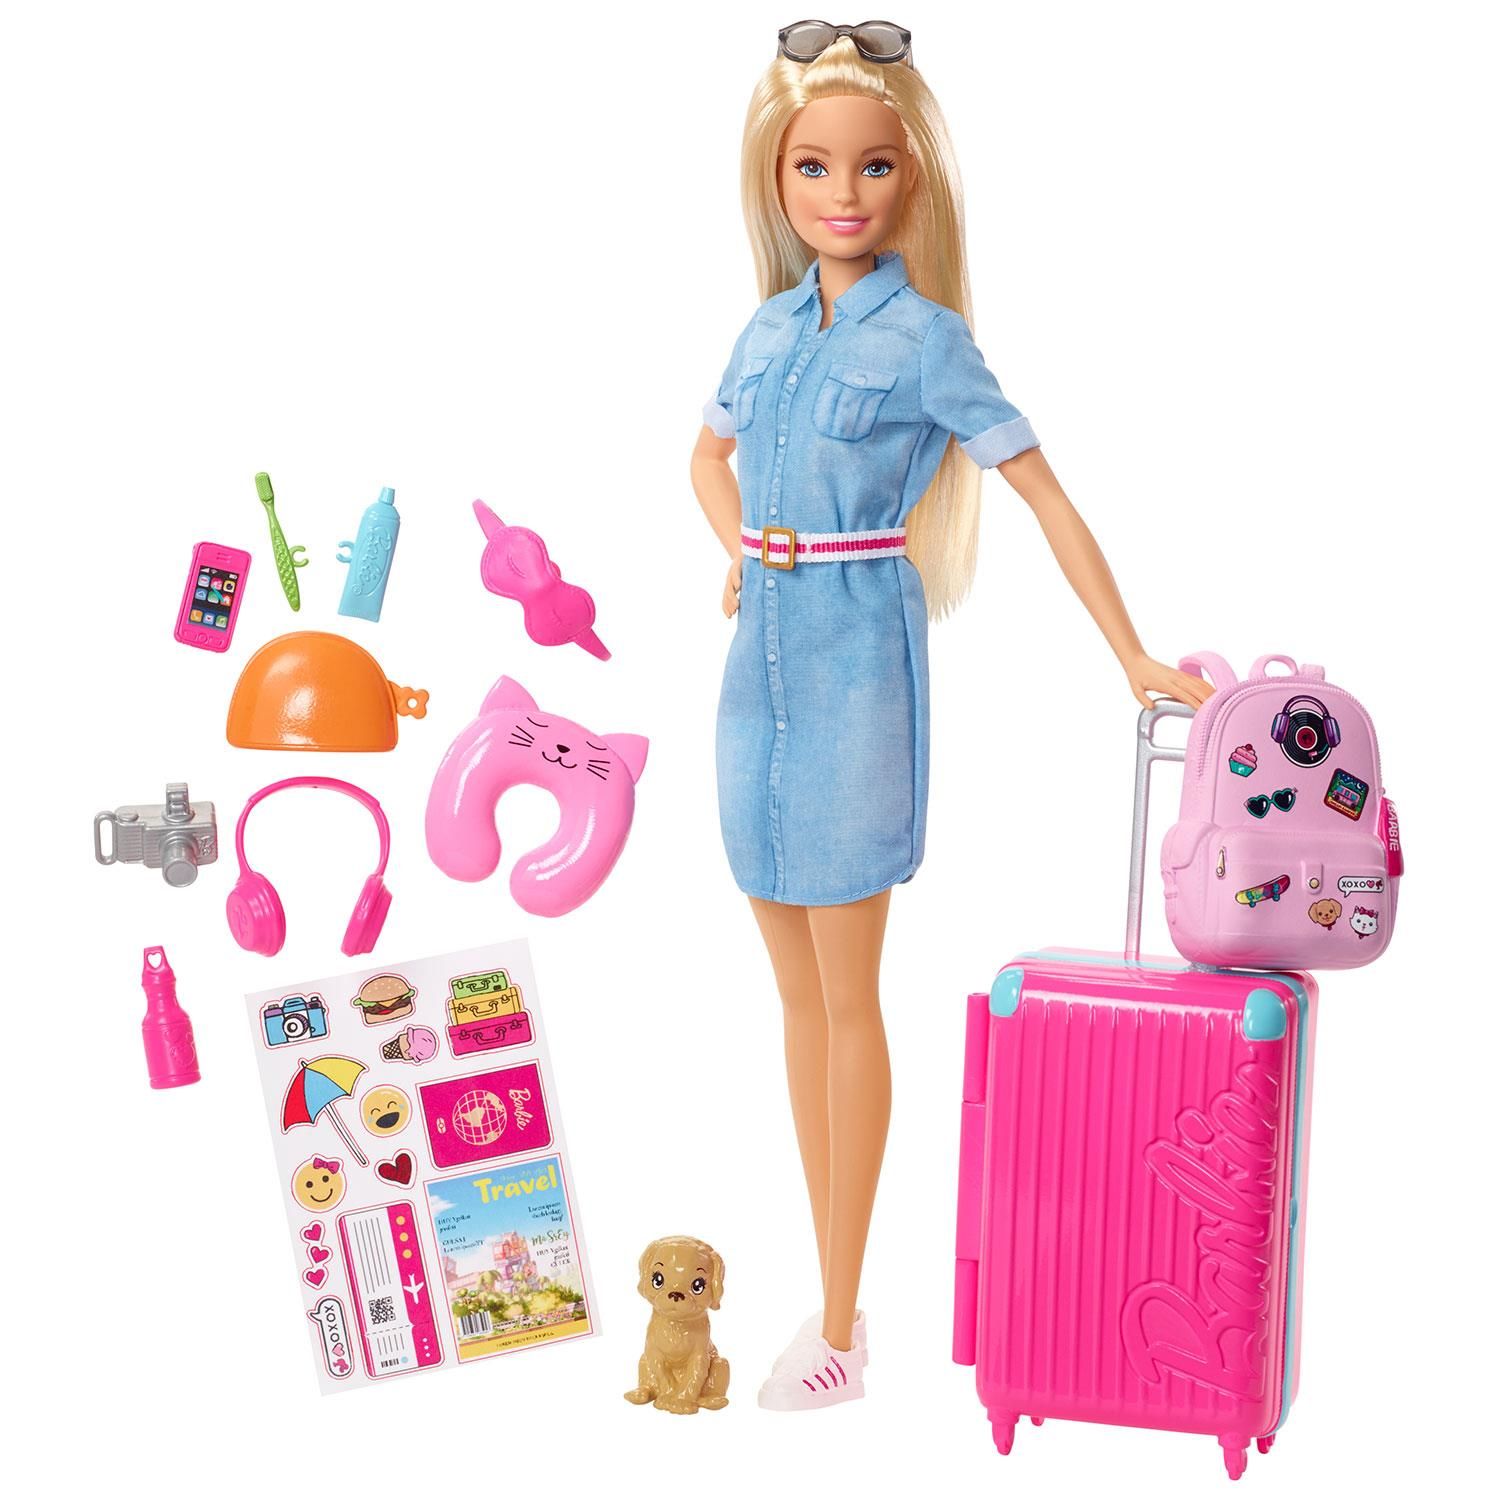 Inspired by Barbie's Dreamhouse Adventures, this set comes with so many accessories for hours of fun play. Peek into the everyday life of Barbie's exciting adventures. Includes a Barbie doll wearing fashion and shoes, a puppy and carrier, suitcase, backpack, sticker sheet and 10 travel-themed pieces. Dolls cannot stand alone. Colours and decorations may vary. Barbie can take her puppy and your young Barbie fan around the world with this travel-themed set. Complete with a puppy travelling companion and a pink suitcase that opens and closes - it even has a collapsing handle, just like real luggage.

Adorable kids toy from Barbie; send curious minds around the world with a Barbie doll and a travel-themed set inspired by Barbie Dreamhouse Adventures that comes with a puppy for a travel companion, luggage and more than 10 accessories.
​Barbie's pink suitcase has a collapsible handle and opens and closes for packing and unpacking fun - decorate it with the included sheet of stickers (like emojis and a pink passport).
​Iconic travel items included in the set are decorated with bright colours and fun stickers - there's a neck pillow, headphones, eye mask, water bottle, toothbrush, toothpaste, camera and a mobile phone.
​The doll comes ready for children to visit places near and far; wearing a range of Barbie accessories, including a denim shirt dress with colourful belt detail and matching trendy trainers, while a pair of sunglasses add the finishing touch.
Includes a Barbie doll wearing fashion and shoes, puppy and carrier, suitcase, backpack, sticker sheet and 10 travel-themed pieces; doll cannot stand alone; colours and decorations may vary.


Box Contains 1x Barbie Doll, 1x Puppy, 1x headphone, 1x neck pillow, 1x camera, 1x water bottle, 1x cell phone, 1x bag pack, 1x trolly bag, 1x eye mask, 1x toothbrush, 1x toothpaste.